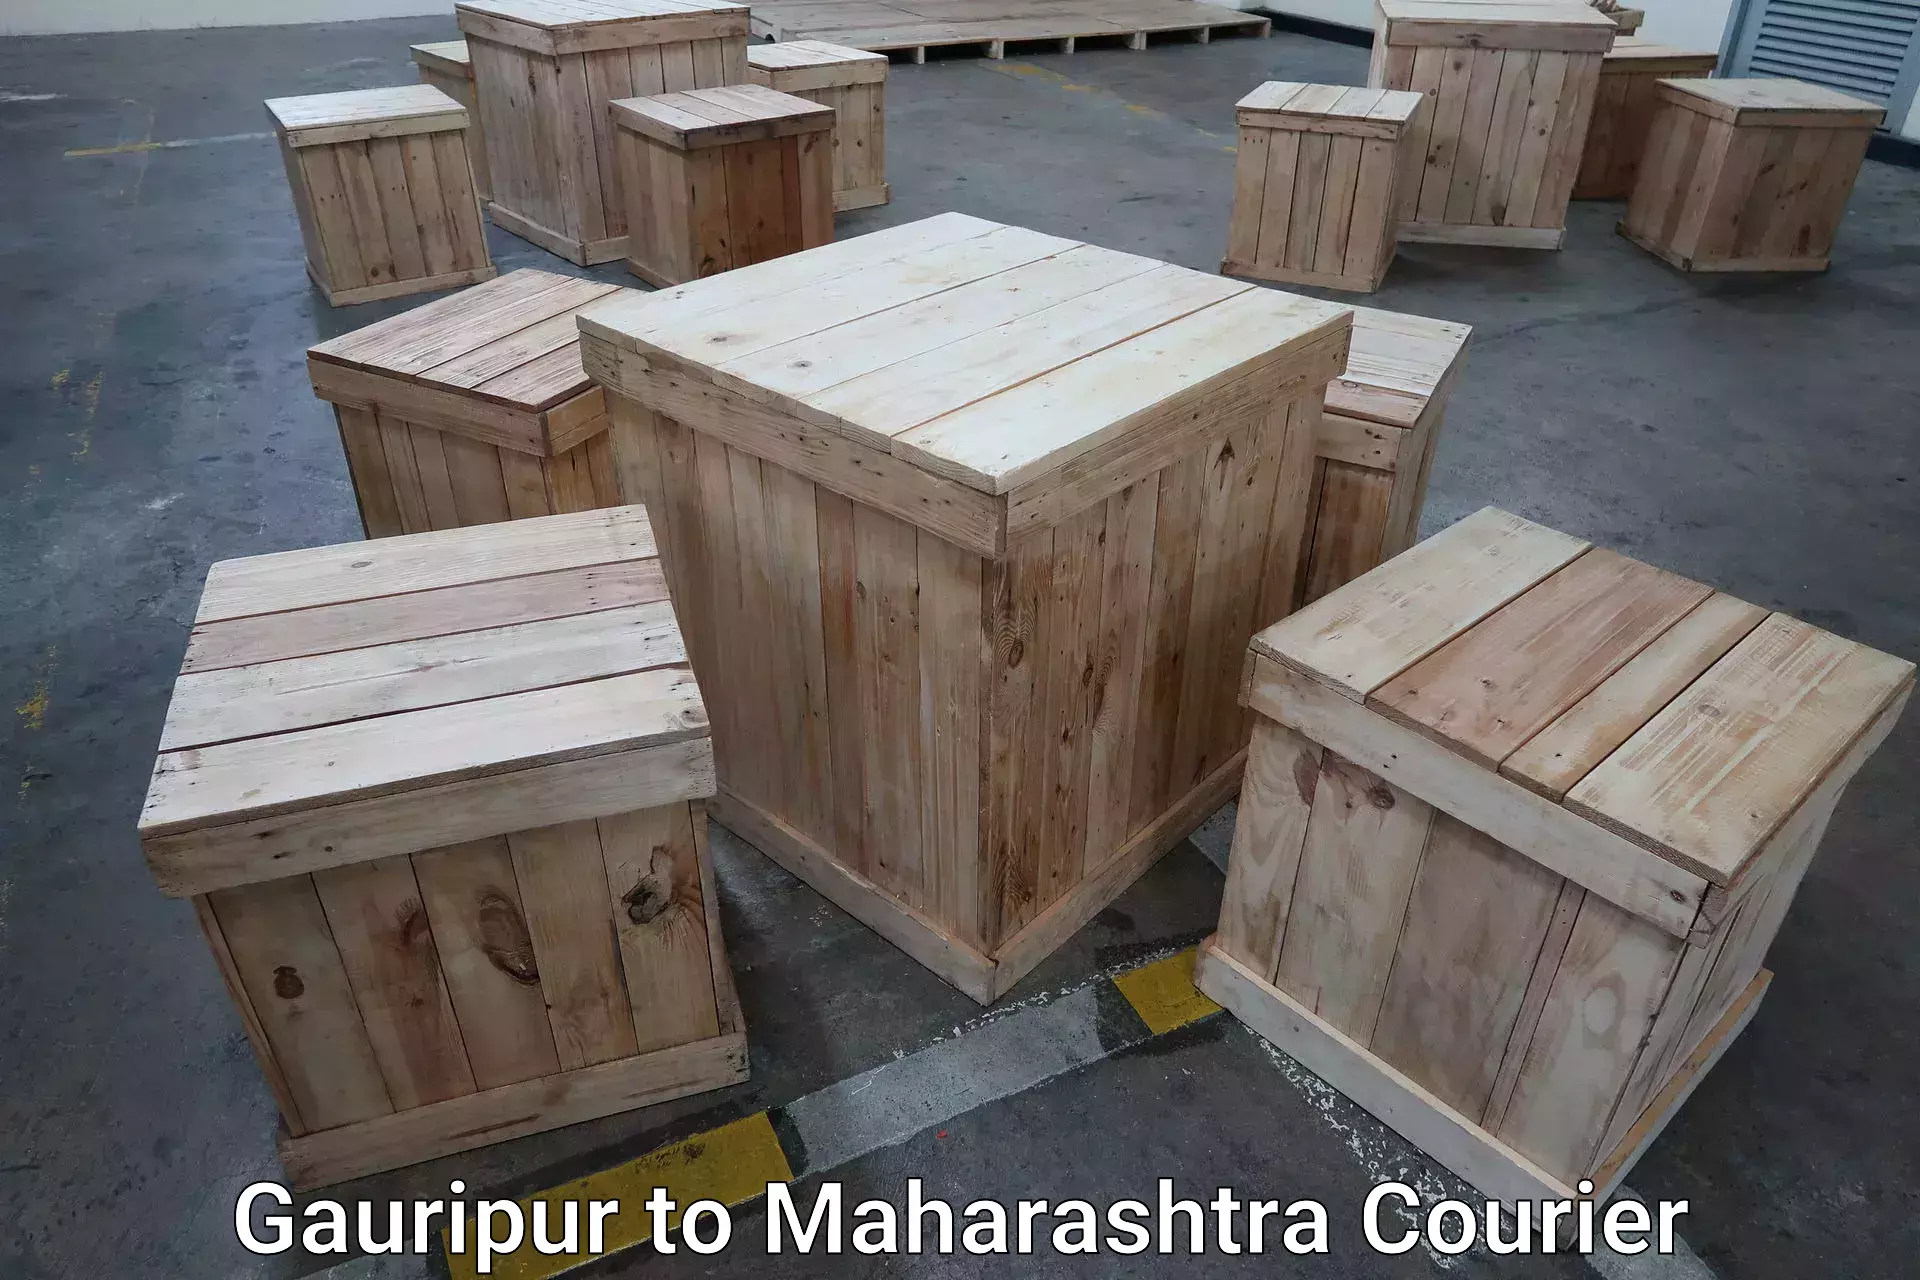 Luggage delivery providers Gauripur to Mumbai Port